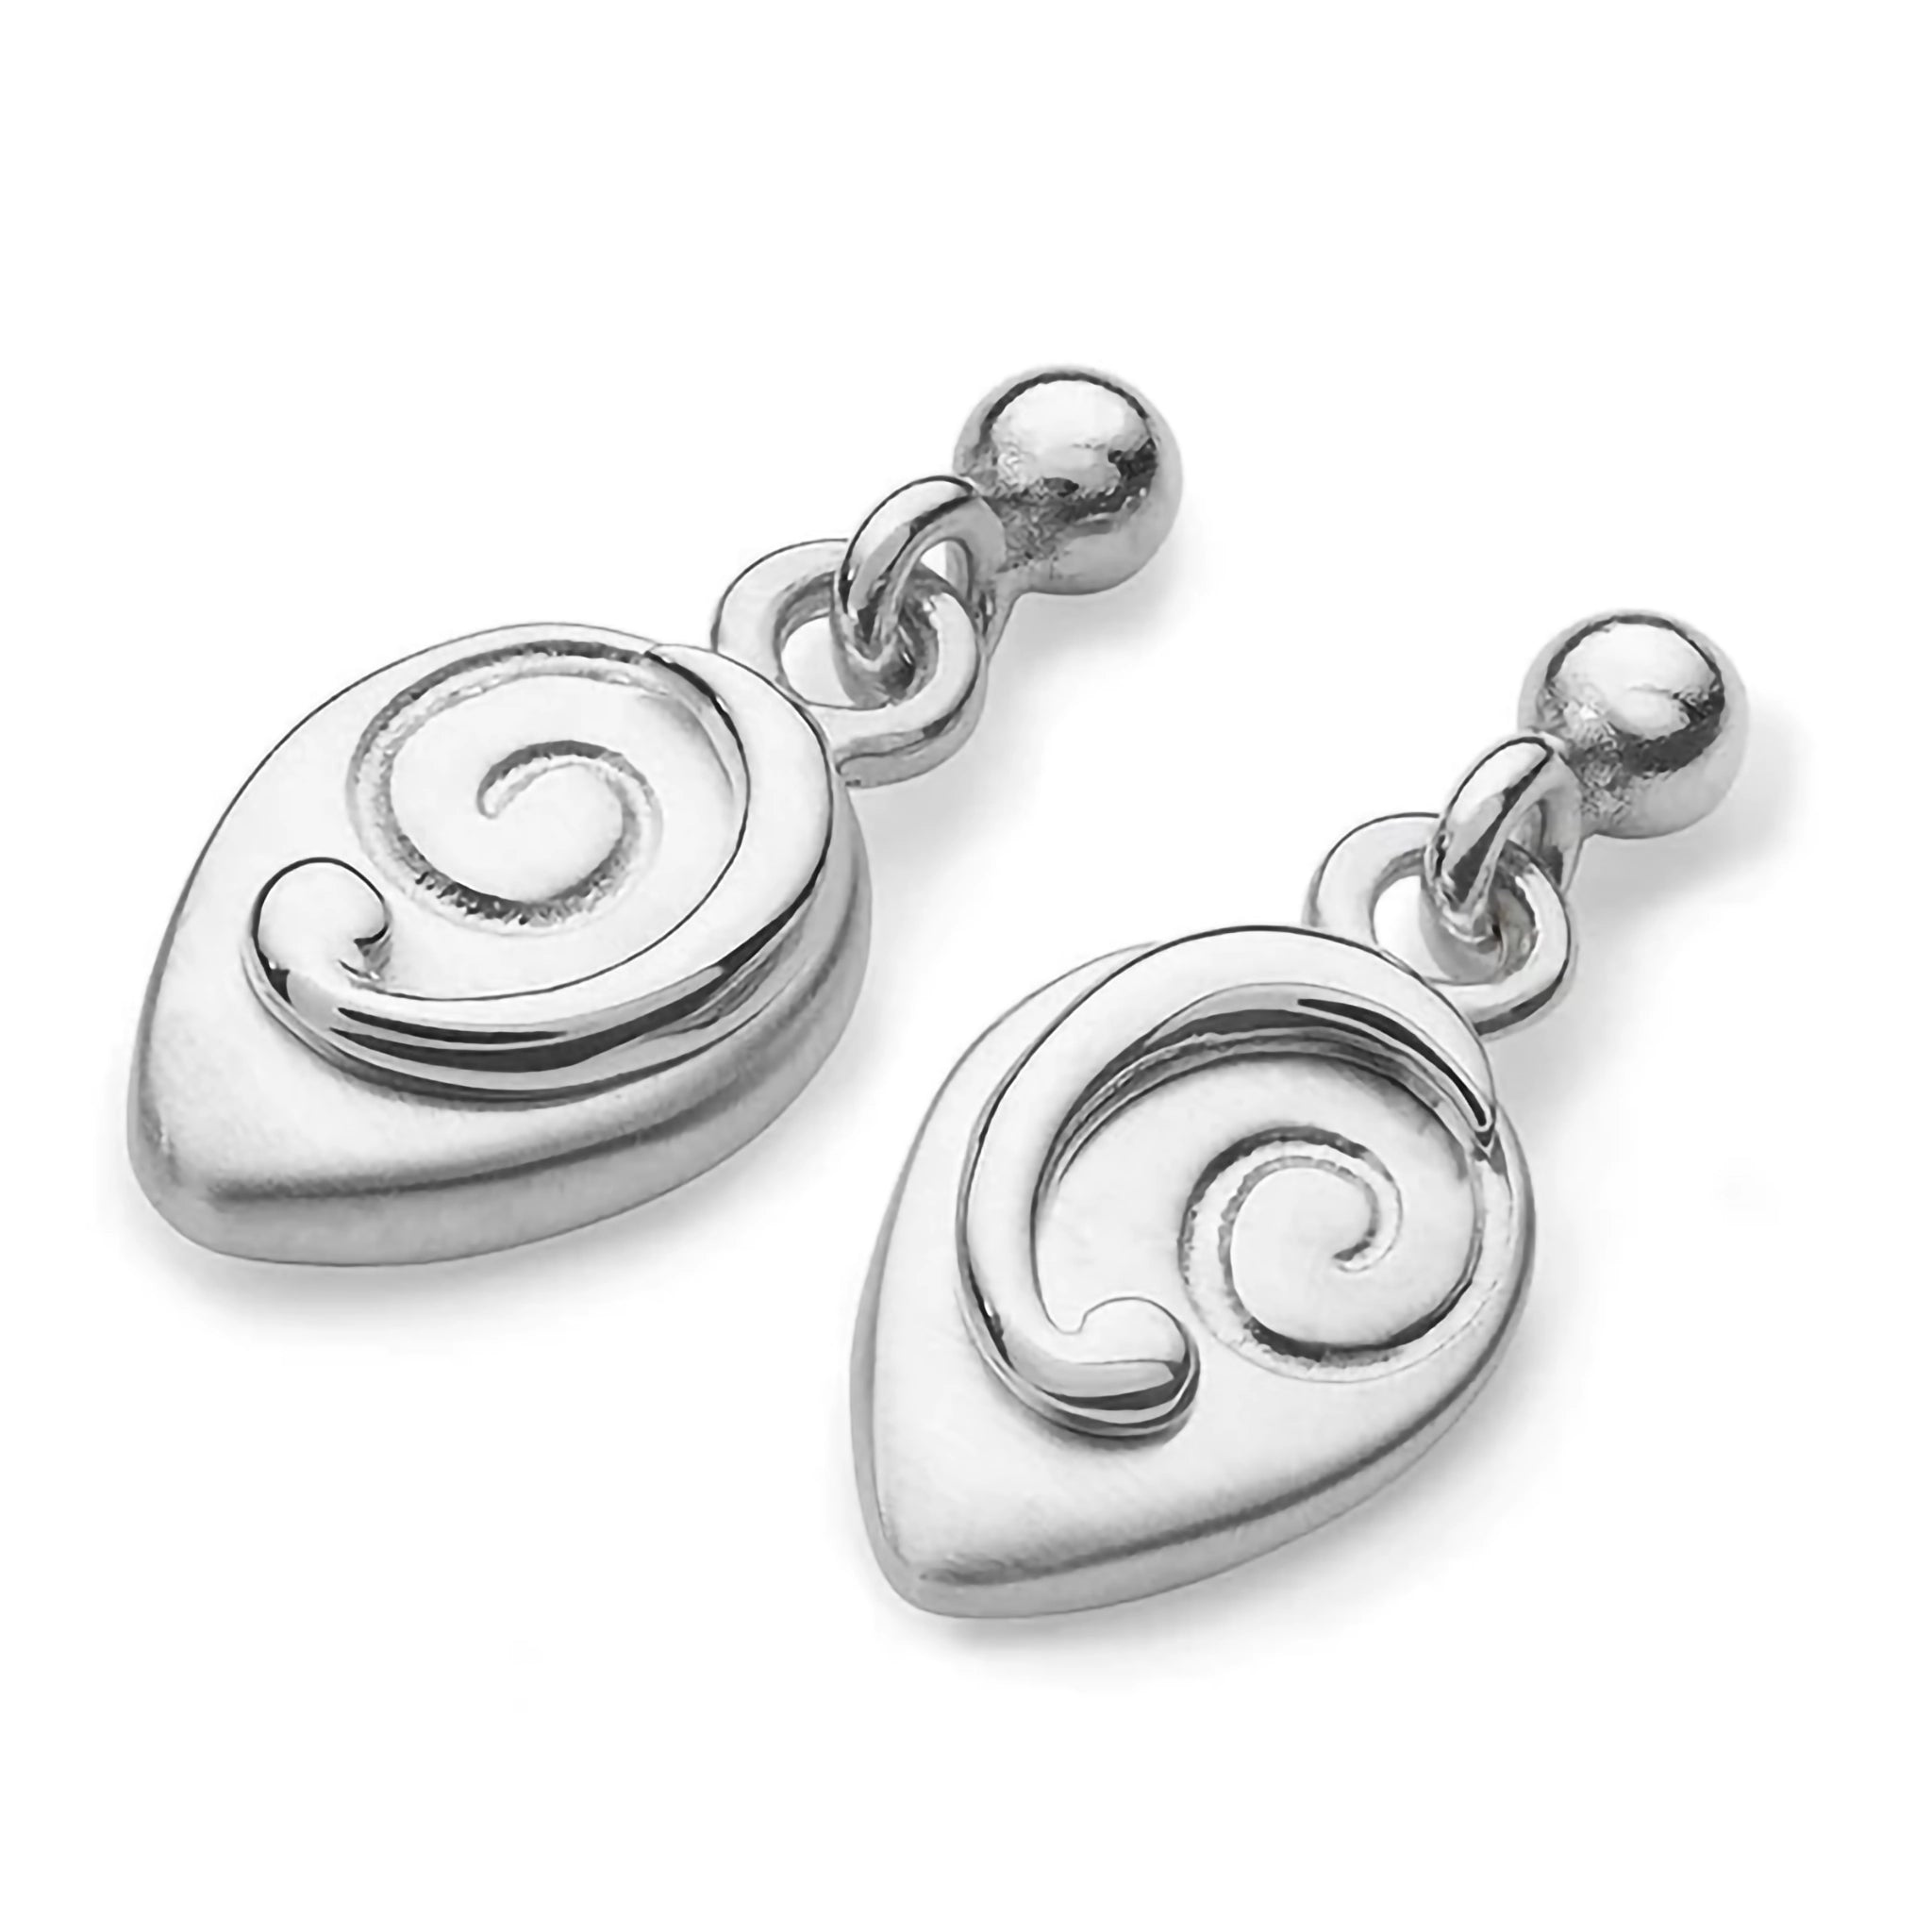 A pair of silver arrow head drop earrings featuring a raised swirl and engraved swirl in matt and shiny finish